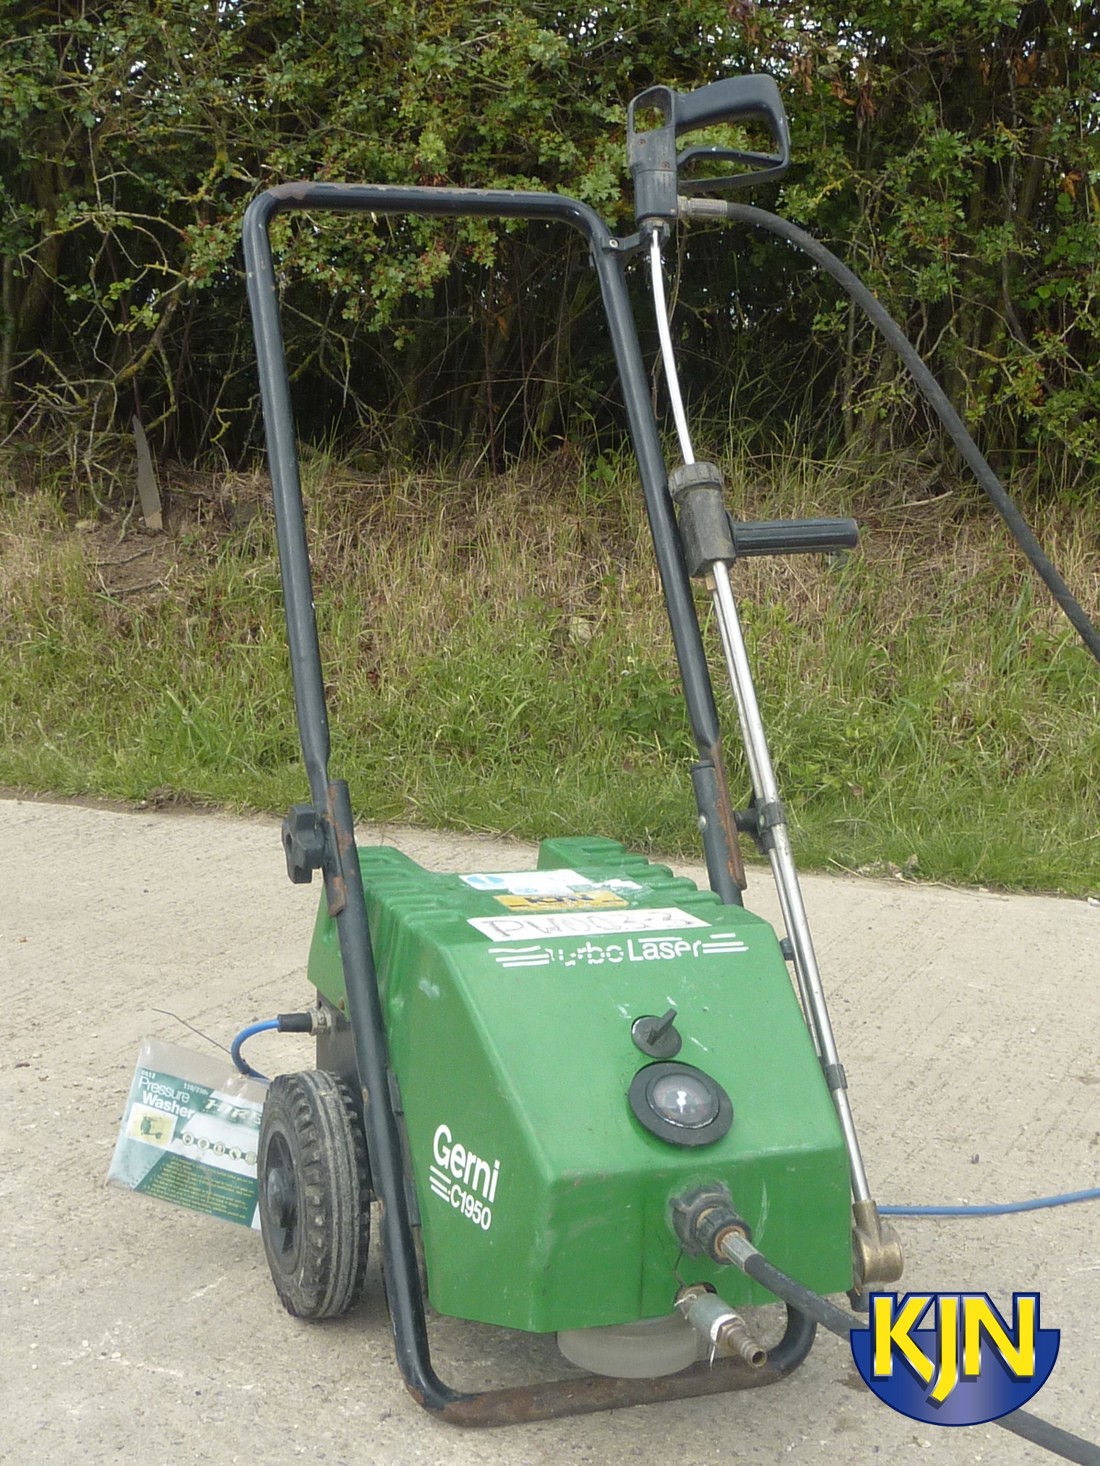 Cold Water Pressure Washer up to 1,250 psi / 86 bar